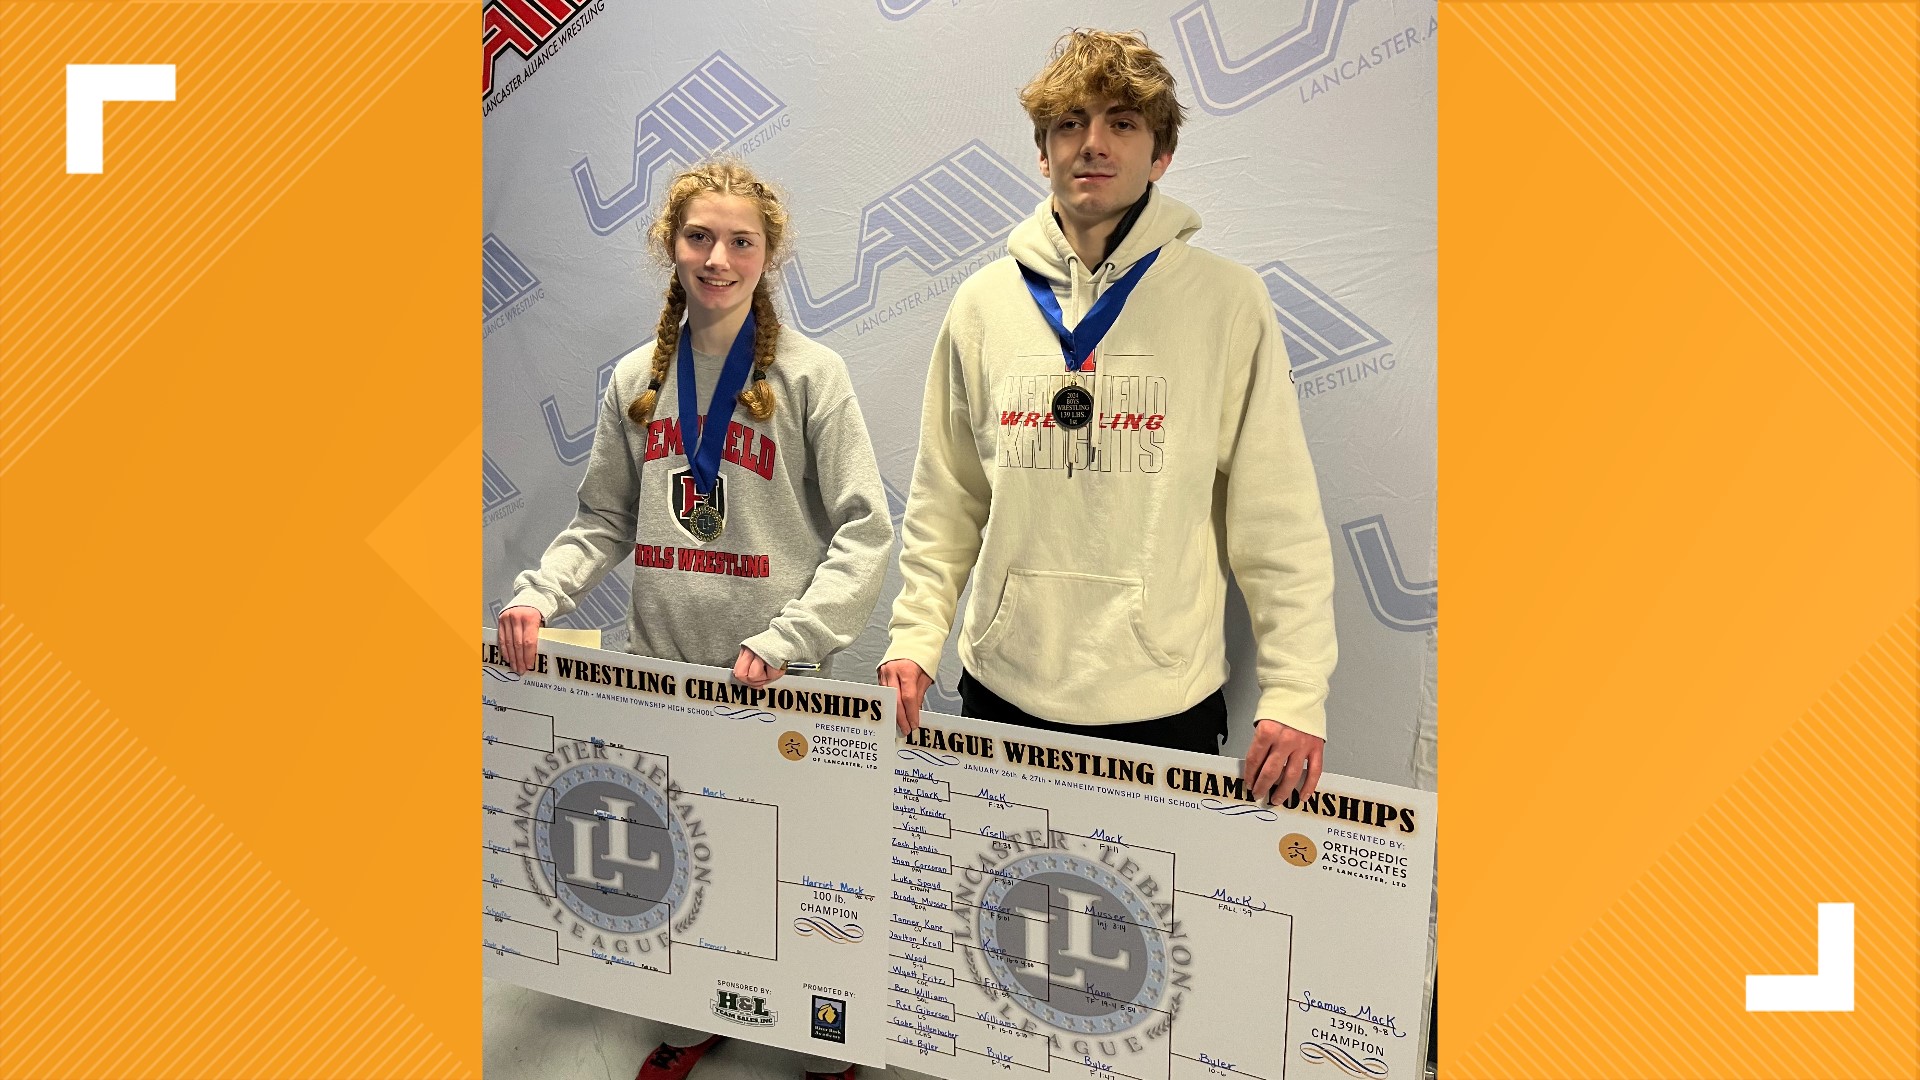 Hattie and Seamus Mack have become the first brother and sister duo to win League Championships, with States on the horizon.